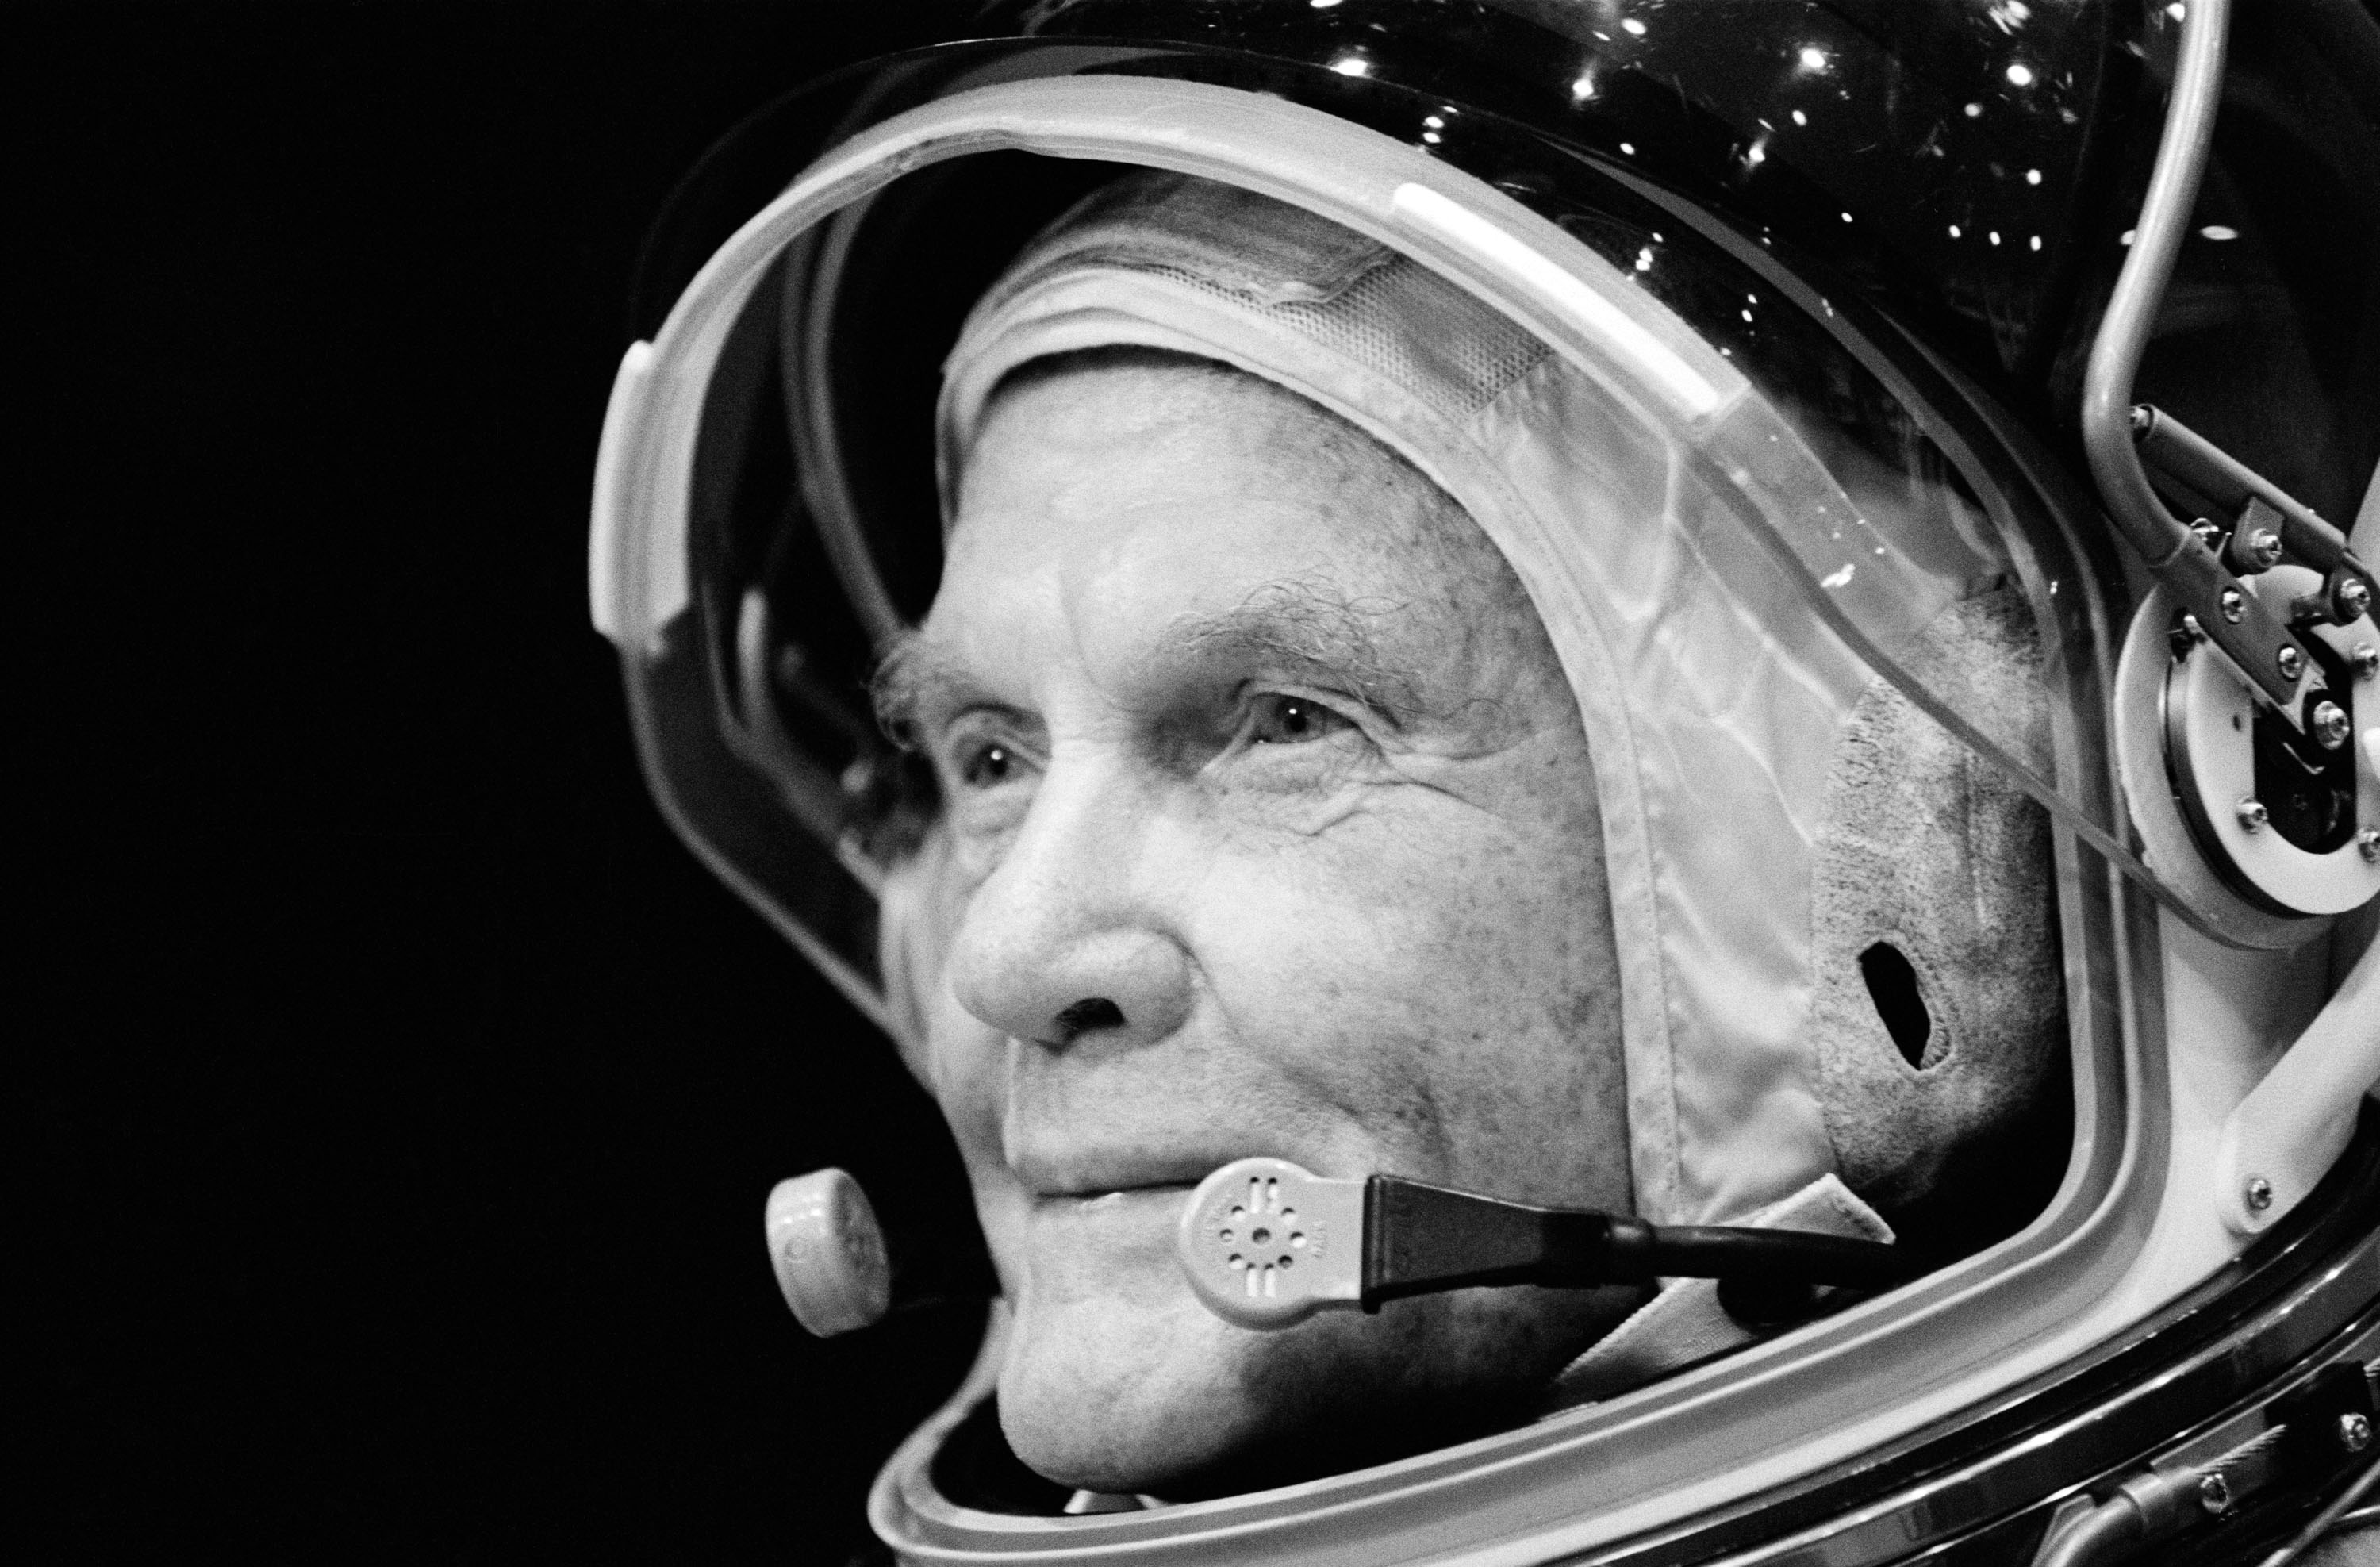 Astronaut John Glenn trains at the Johnson Space Center on Aug. 28, 1998 in Houston, Texas. (David Hume Kennerly&mdash;Getty Images)